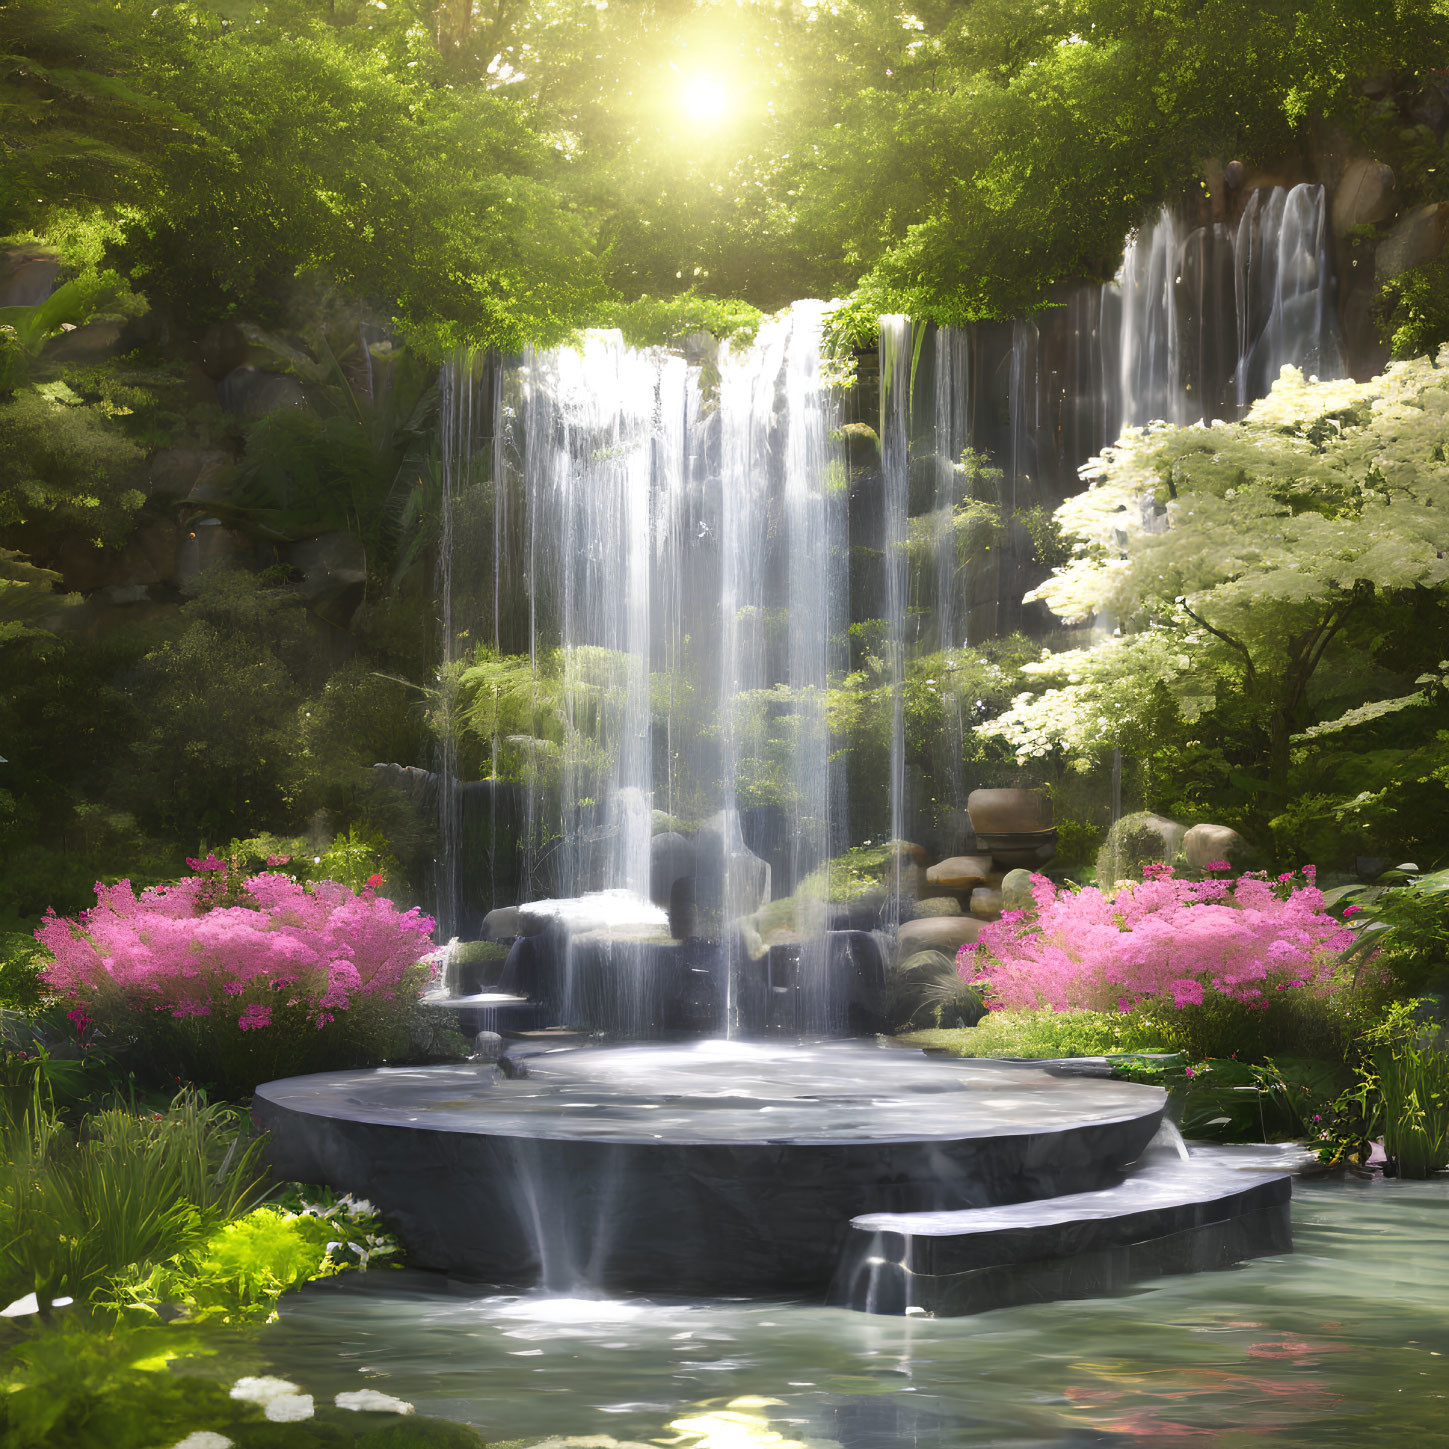 Tranquil Waterfall in Lush Garden with Sunlight and Blossoms